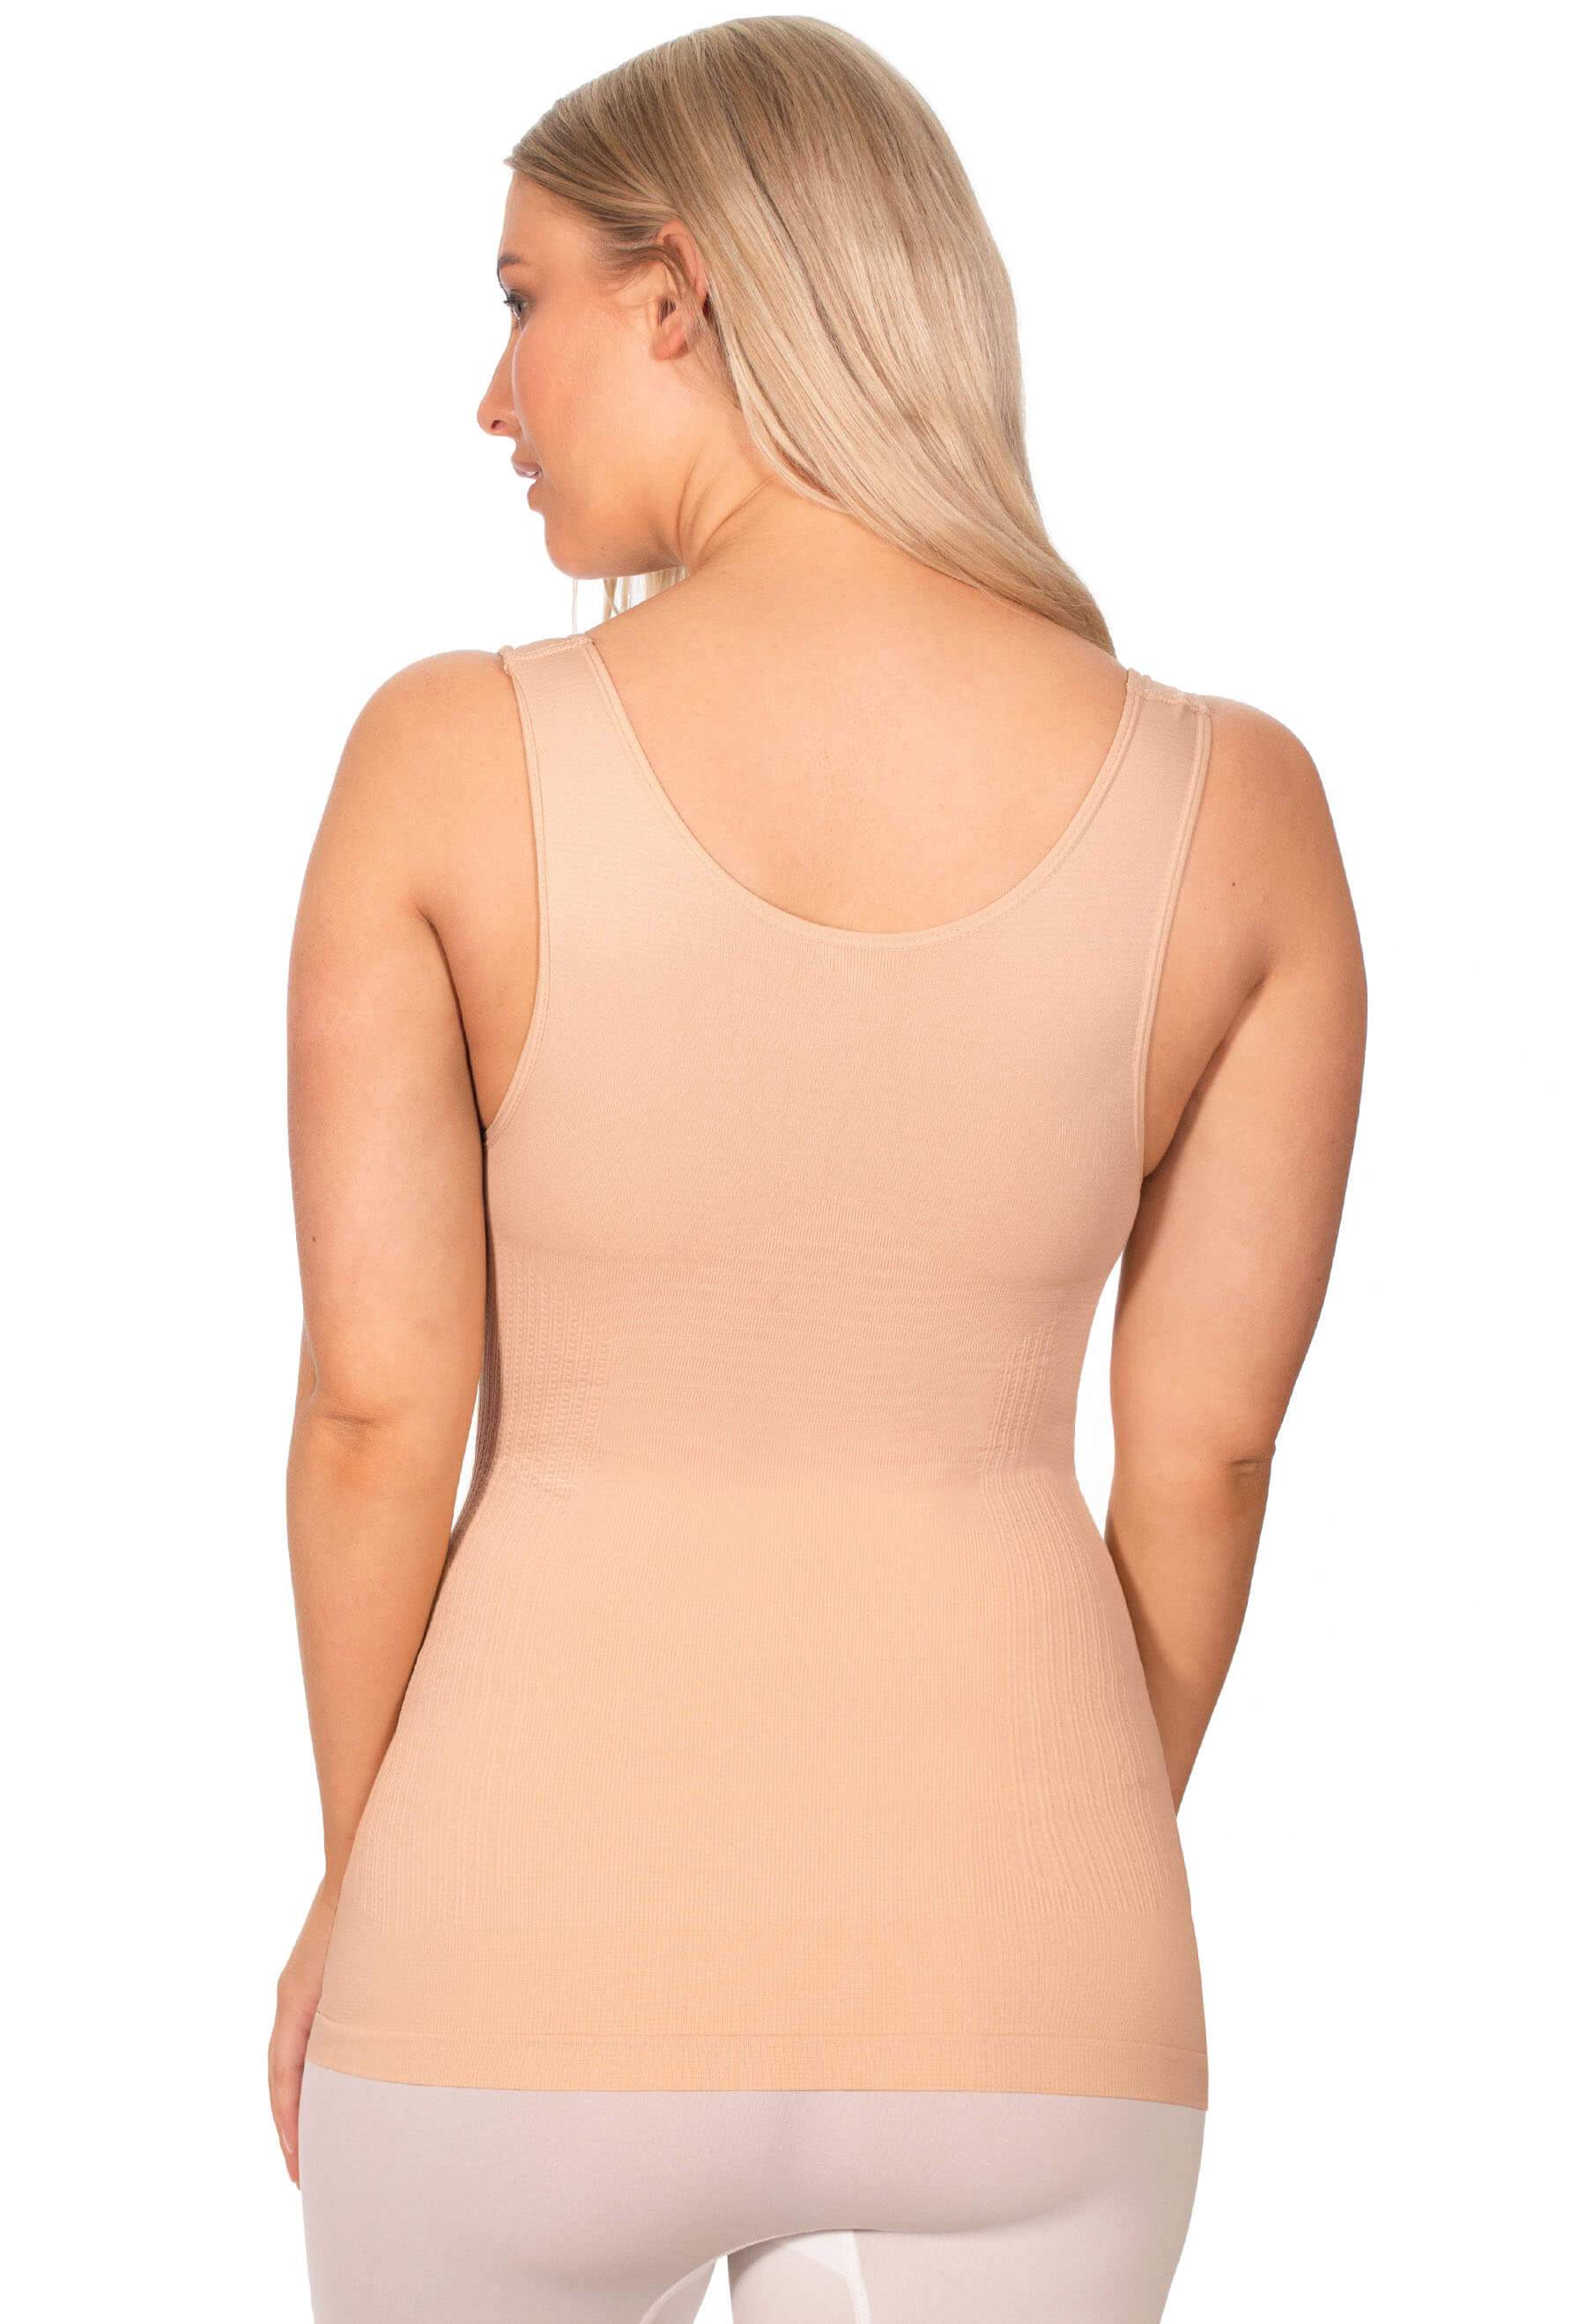 Spanx Shape My Day Open-Bust Camisole - Top - Shapewear